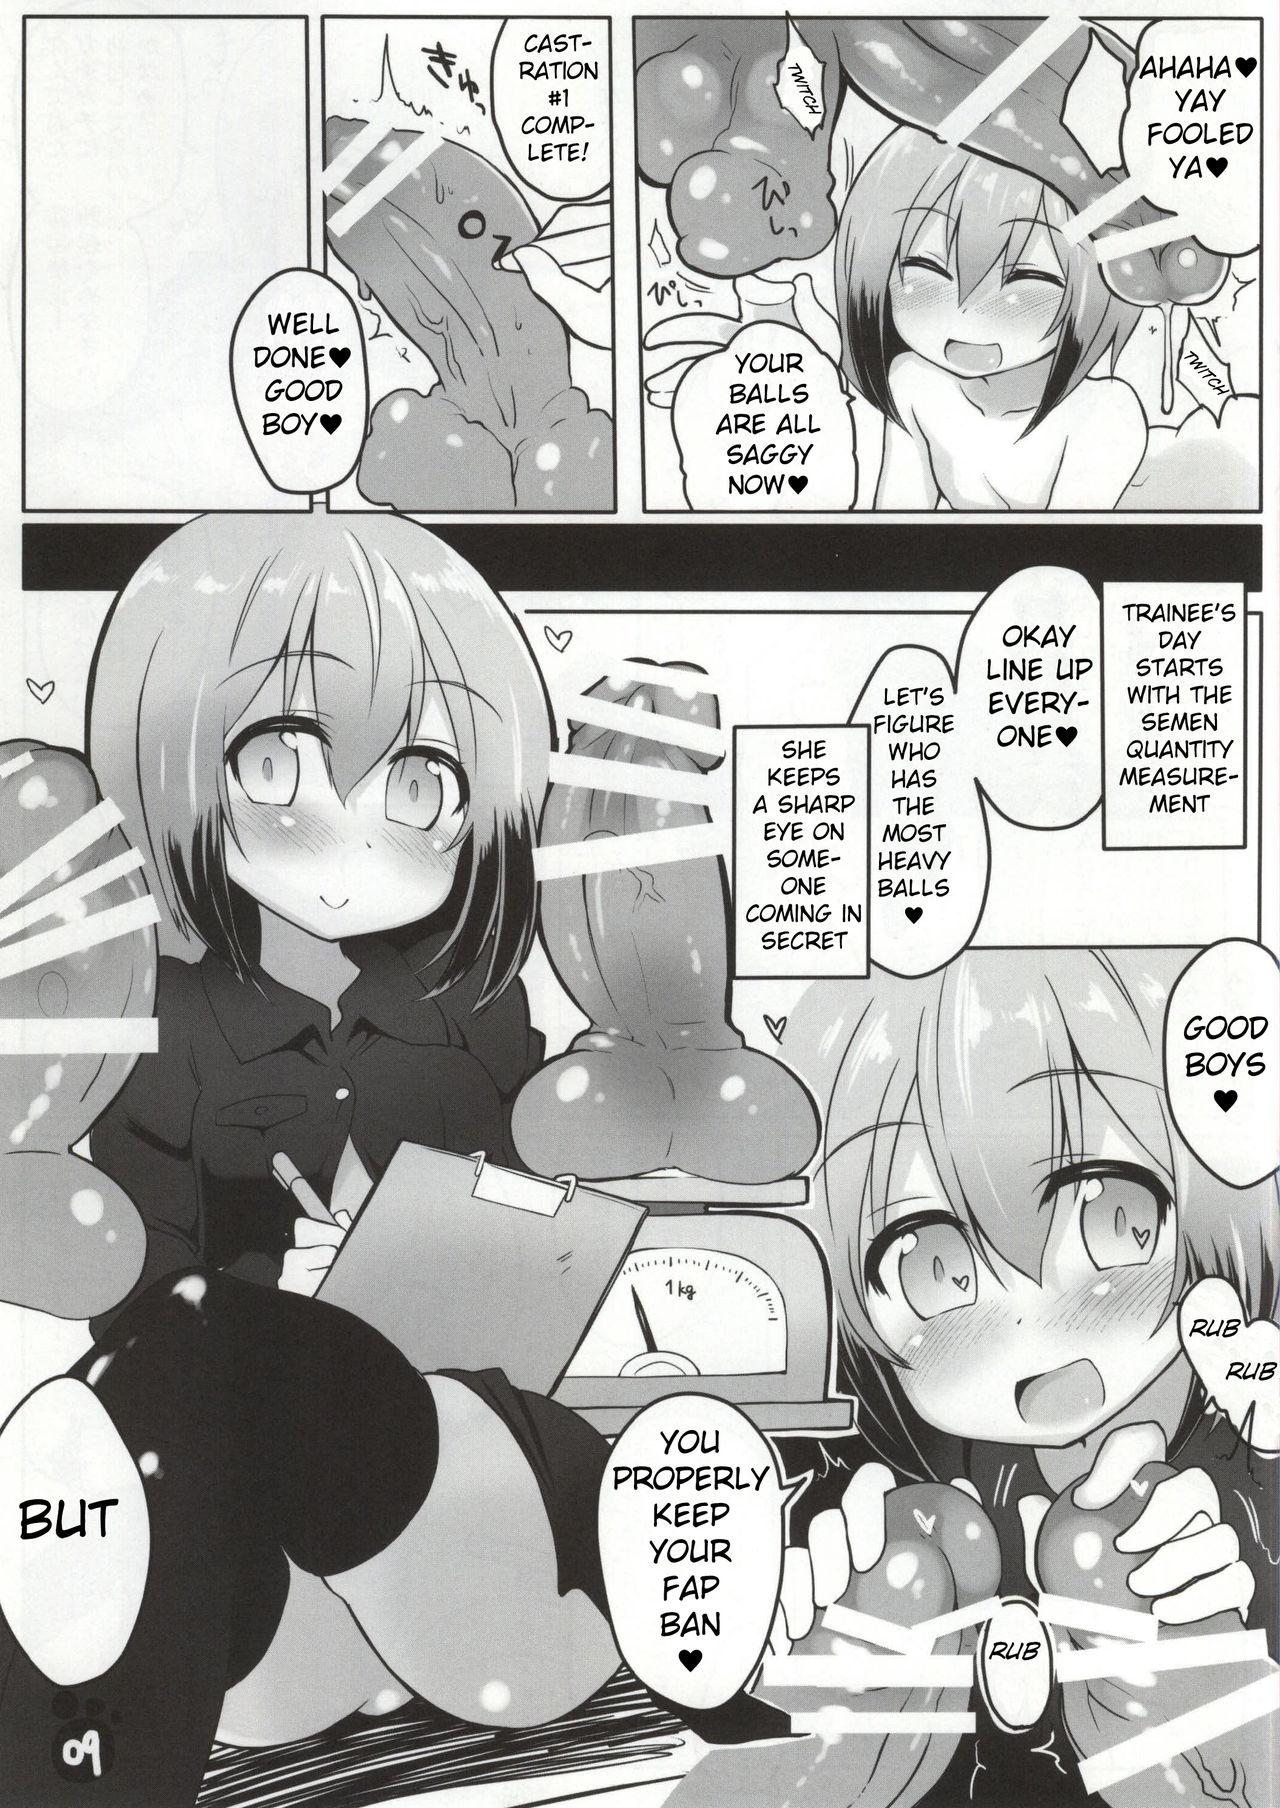 Babes SMASH NUTS FESTIVAL!!! - Strike witches Putinha - Page 9